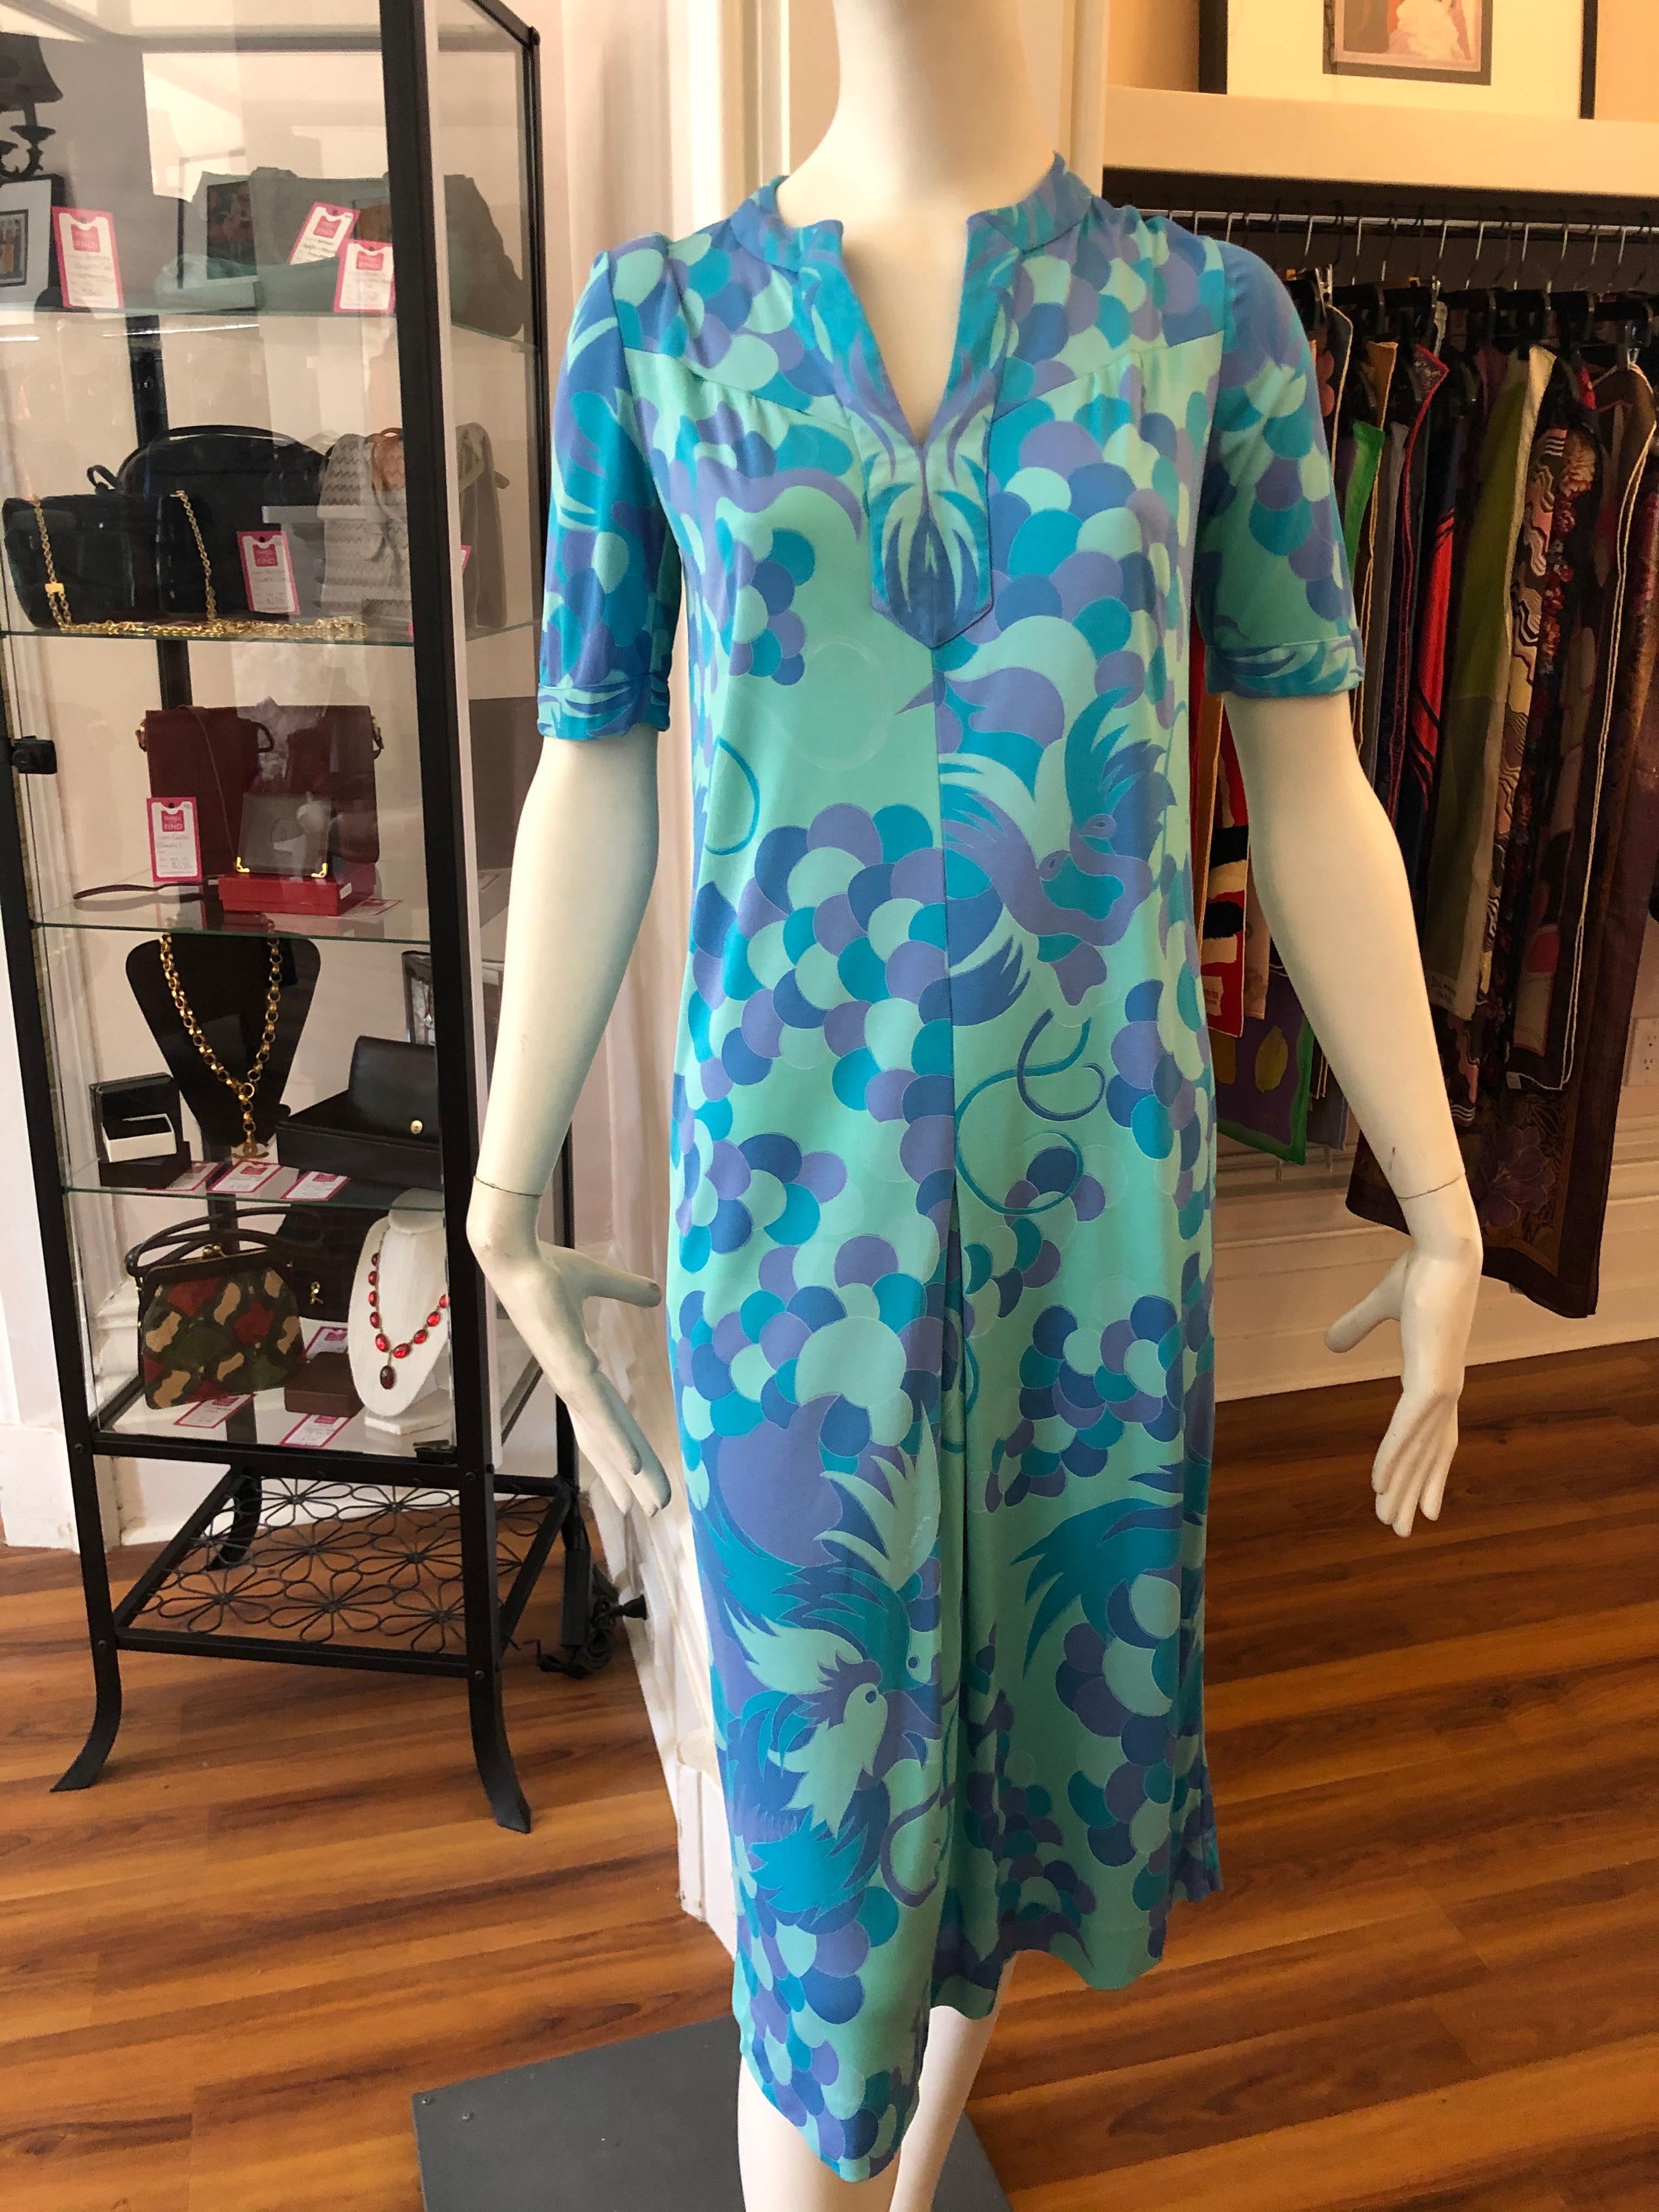 Gianni Versace designed this dress for Di Parisini in the 1970s as one of his first independent commissions. This dress is made of 100% silk and the print comprises exotic birds and leaves and circular designs. There is an inverted front pleat 3/4